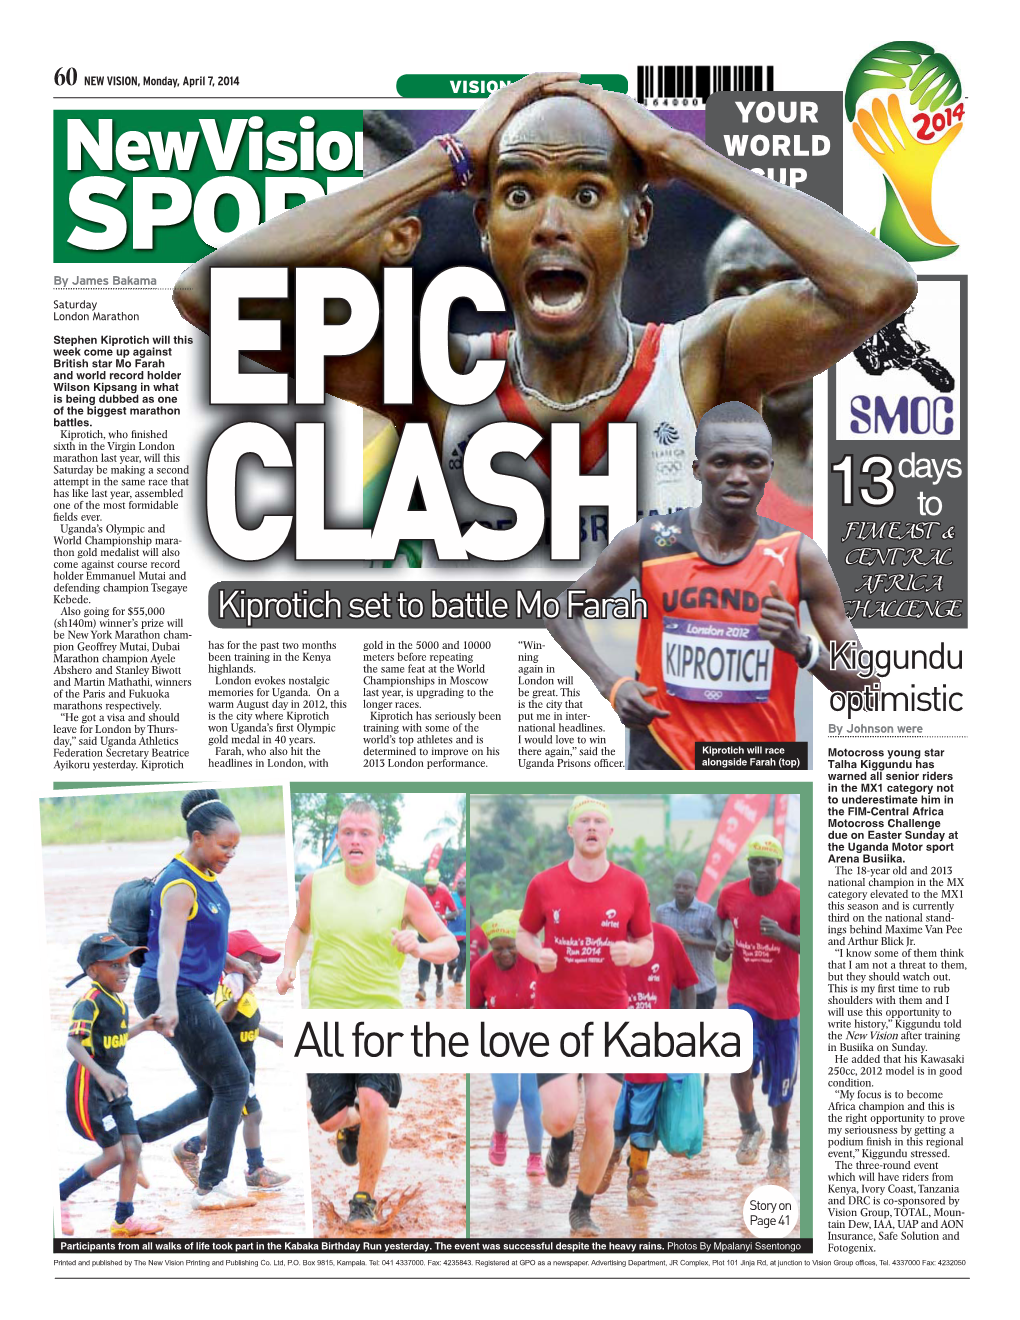 Newvision WORLD CUP SPORT PAPER